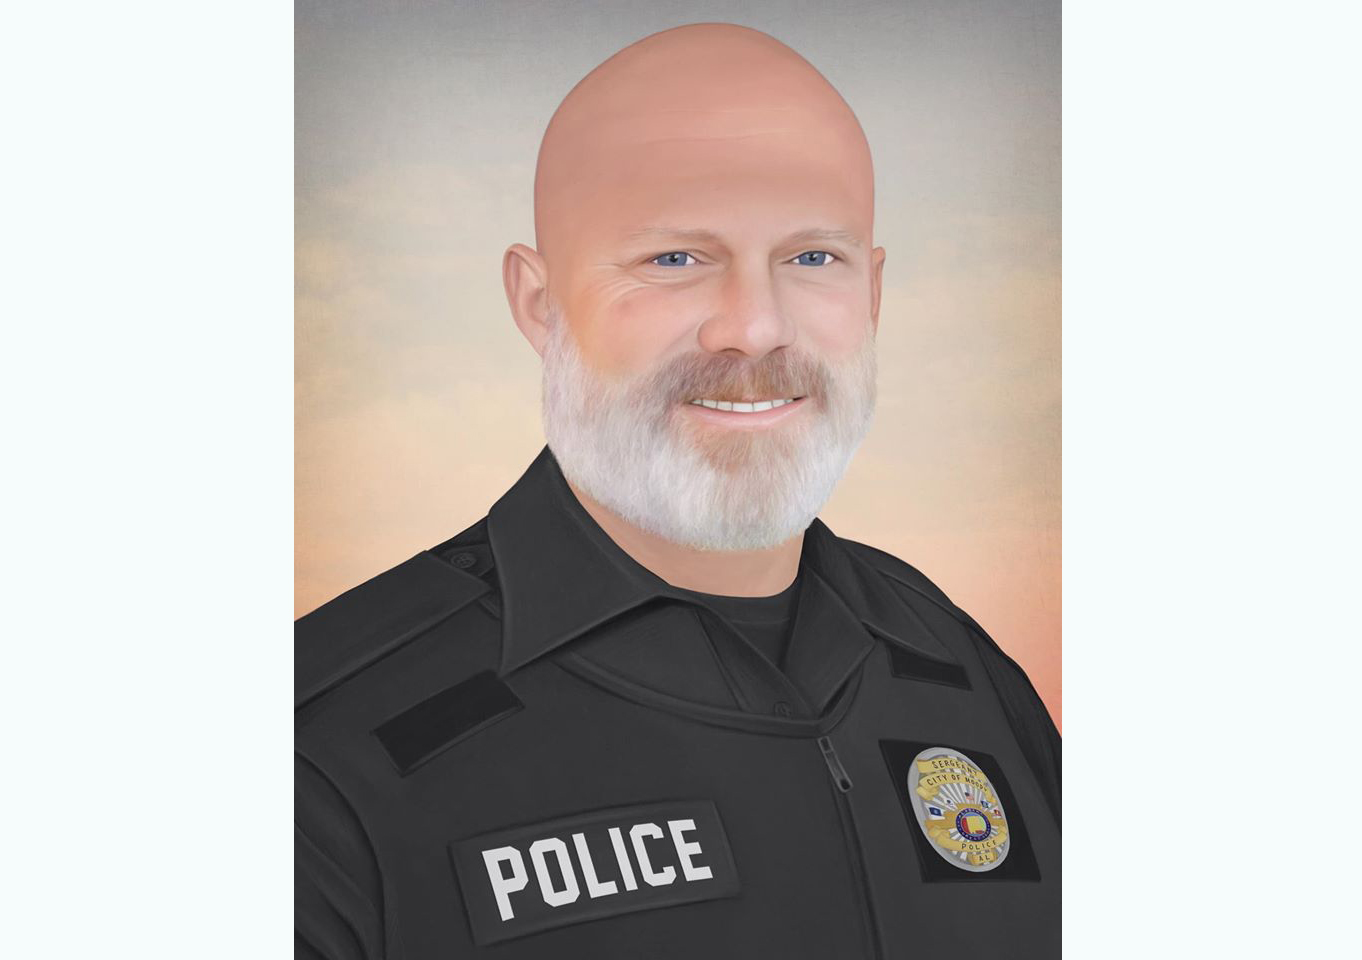 Famed police artist pays tribute to fallen Moody officer Sgt. Stephen Williams